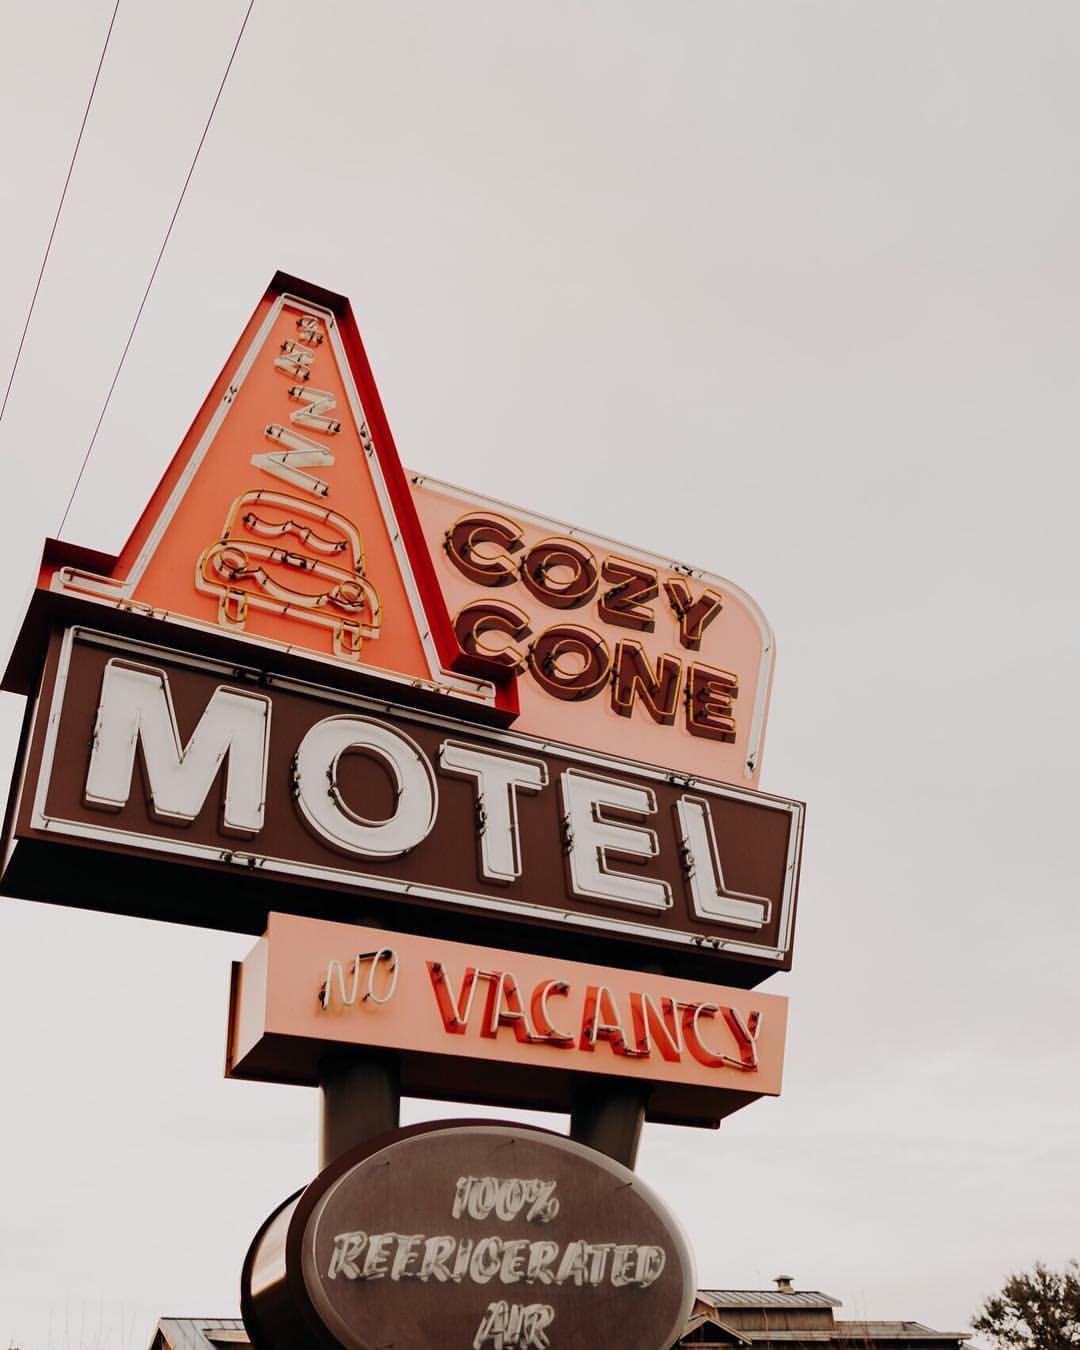 Cozy Cone Logo - Wishing I was able to check into the Cozy Cone Motel right about now